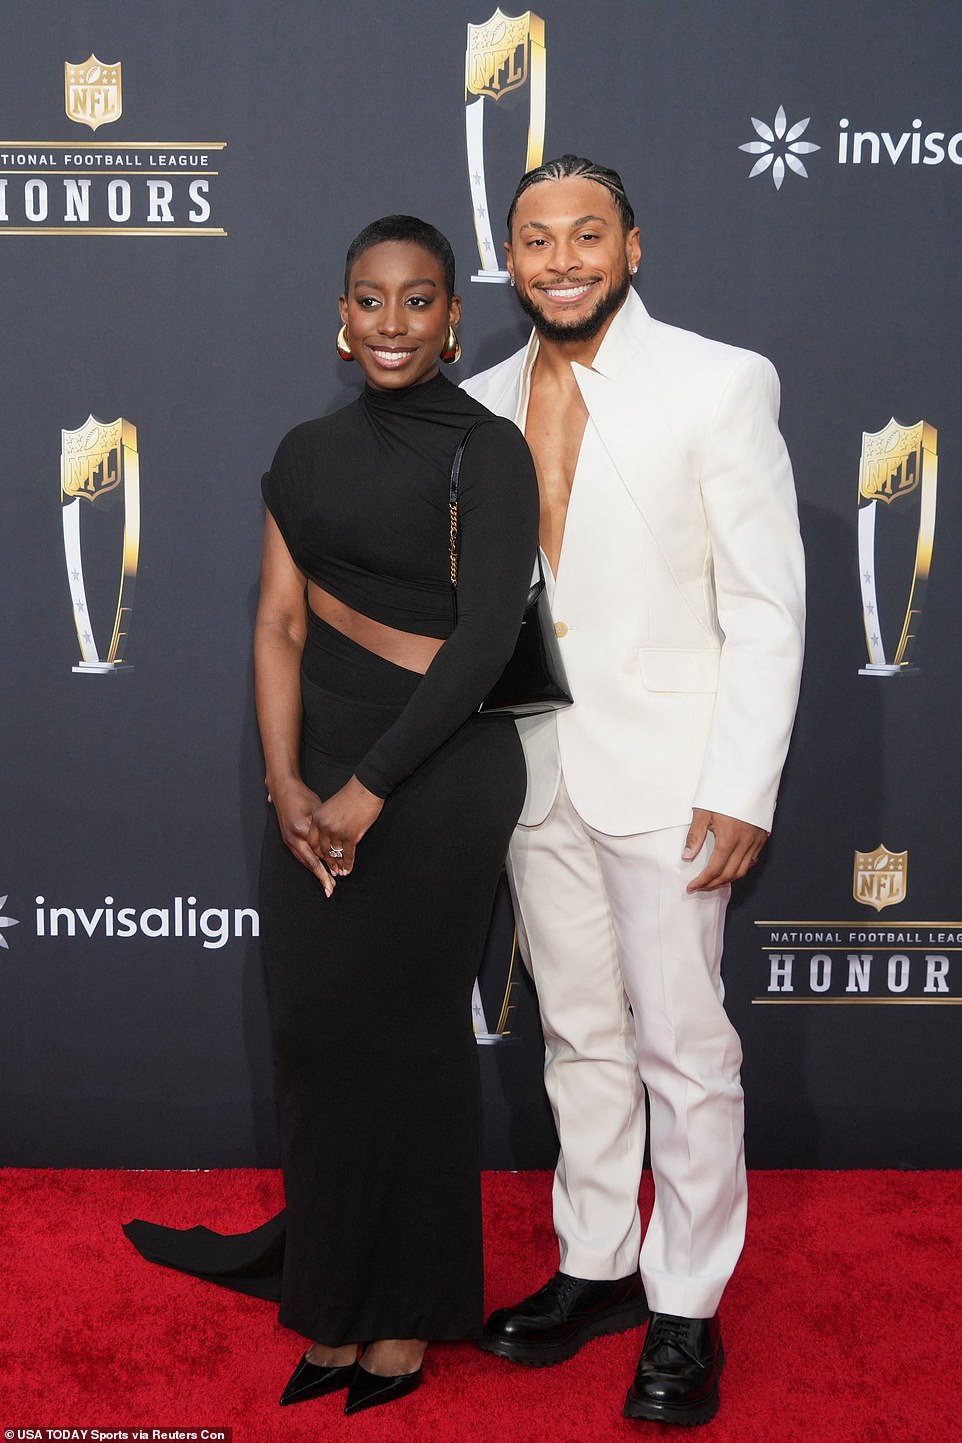 Antoine Winfield Jr. and Tessa Mpagi on the red carpet in style